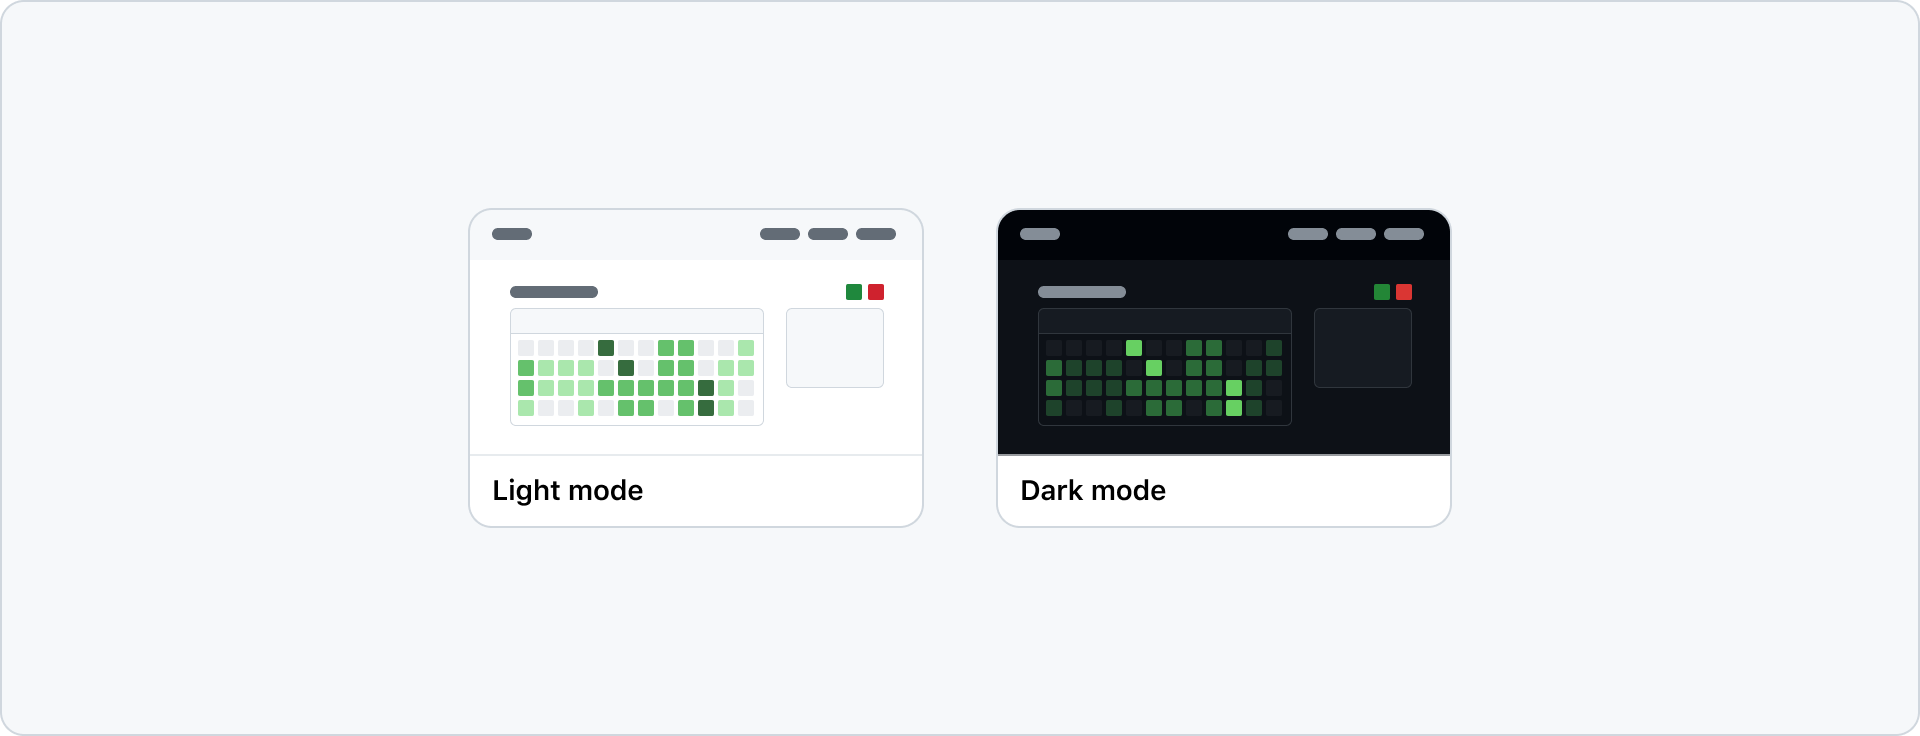 Comparative display of GitHub interface elements in light and dark modes. The light mode shows a browser window with a light background, green contribution graph, and standard browser controls. The dark mode presents the same design with a dark background, enhancing the visibility of green contribution graph and browser controls.